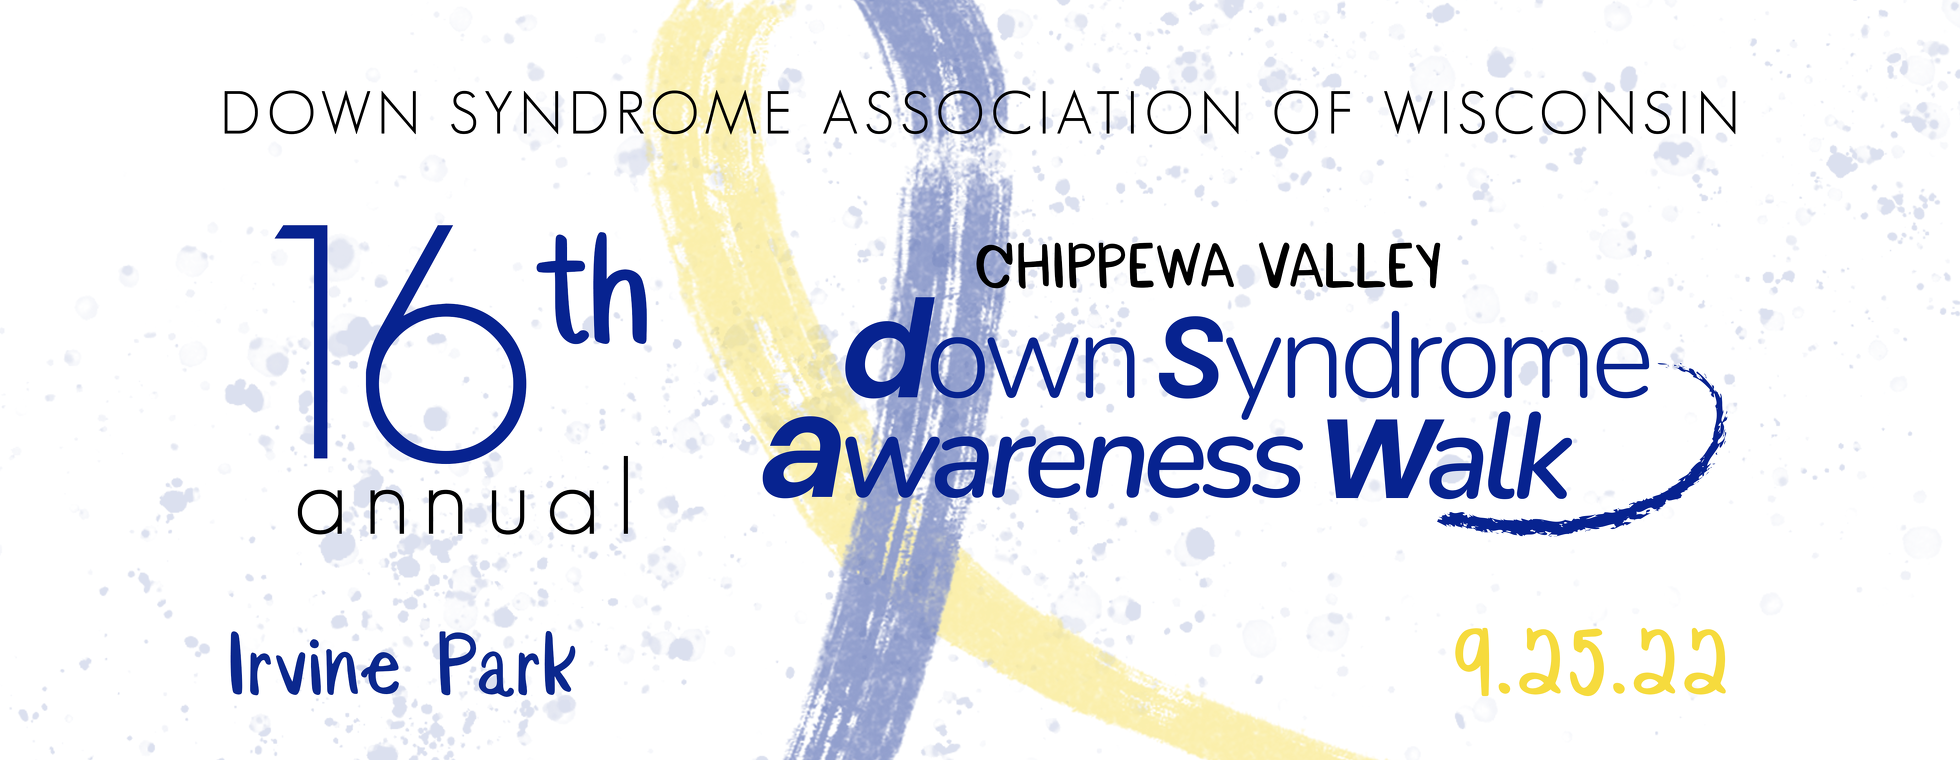 16th Annual DSAW-Chippewa Valley Down Syndrome Awareness Walk